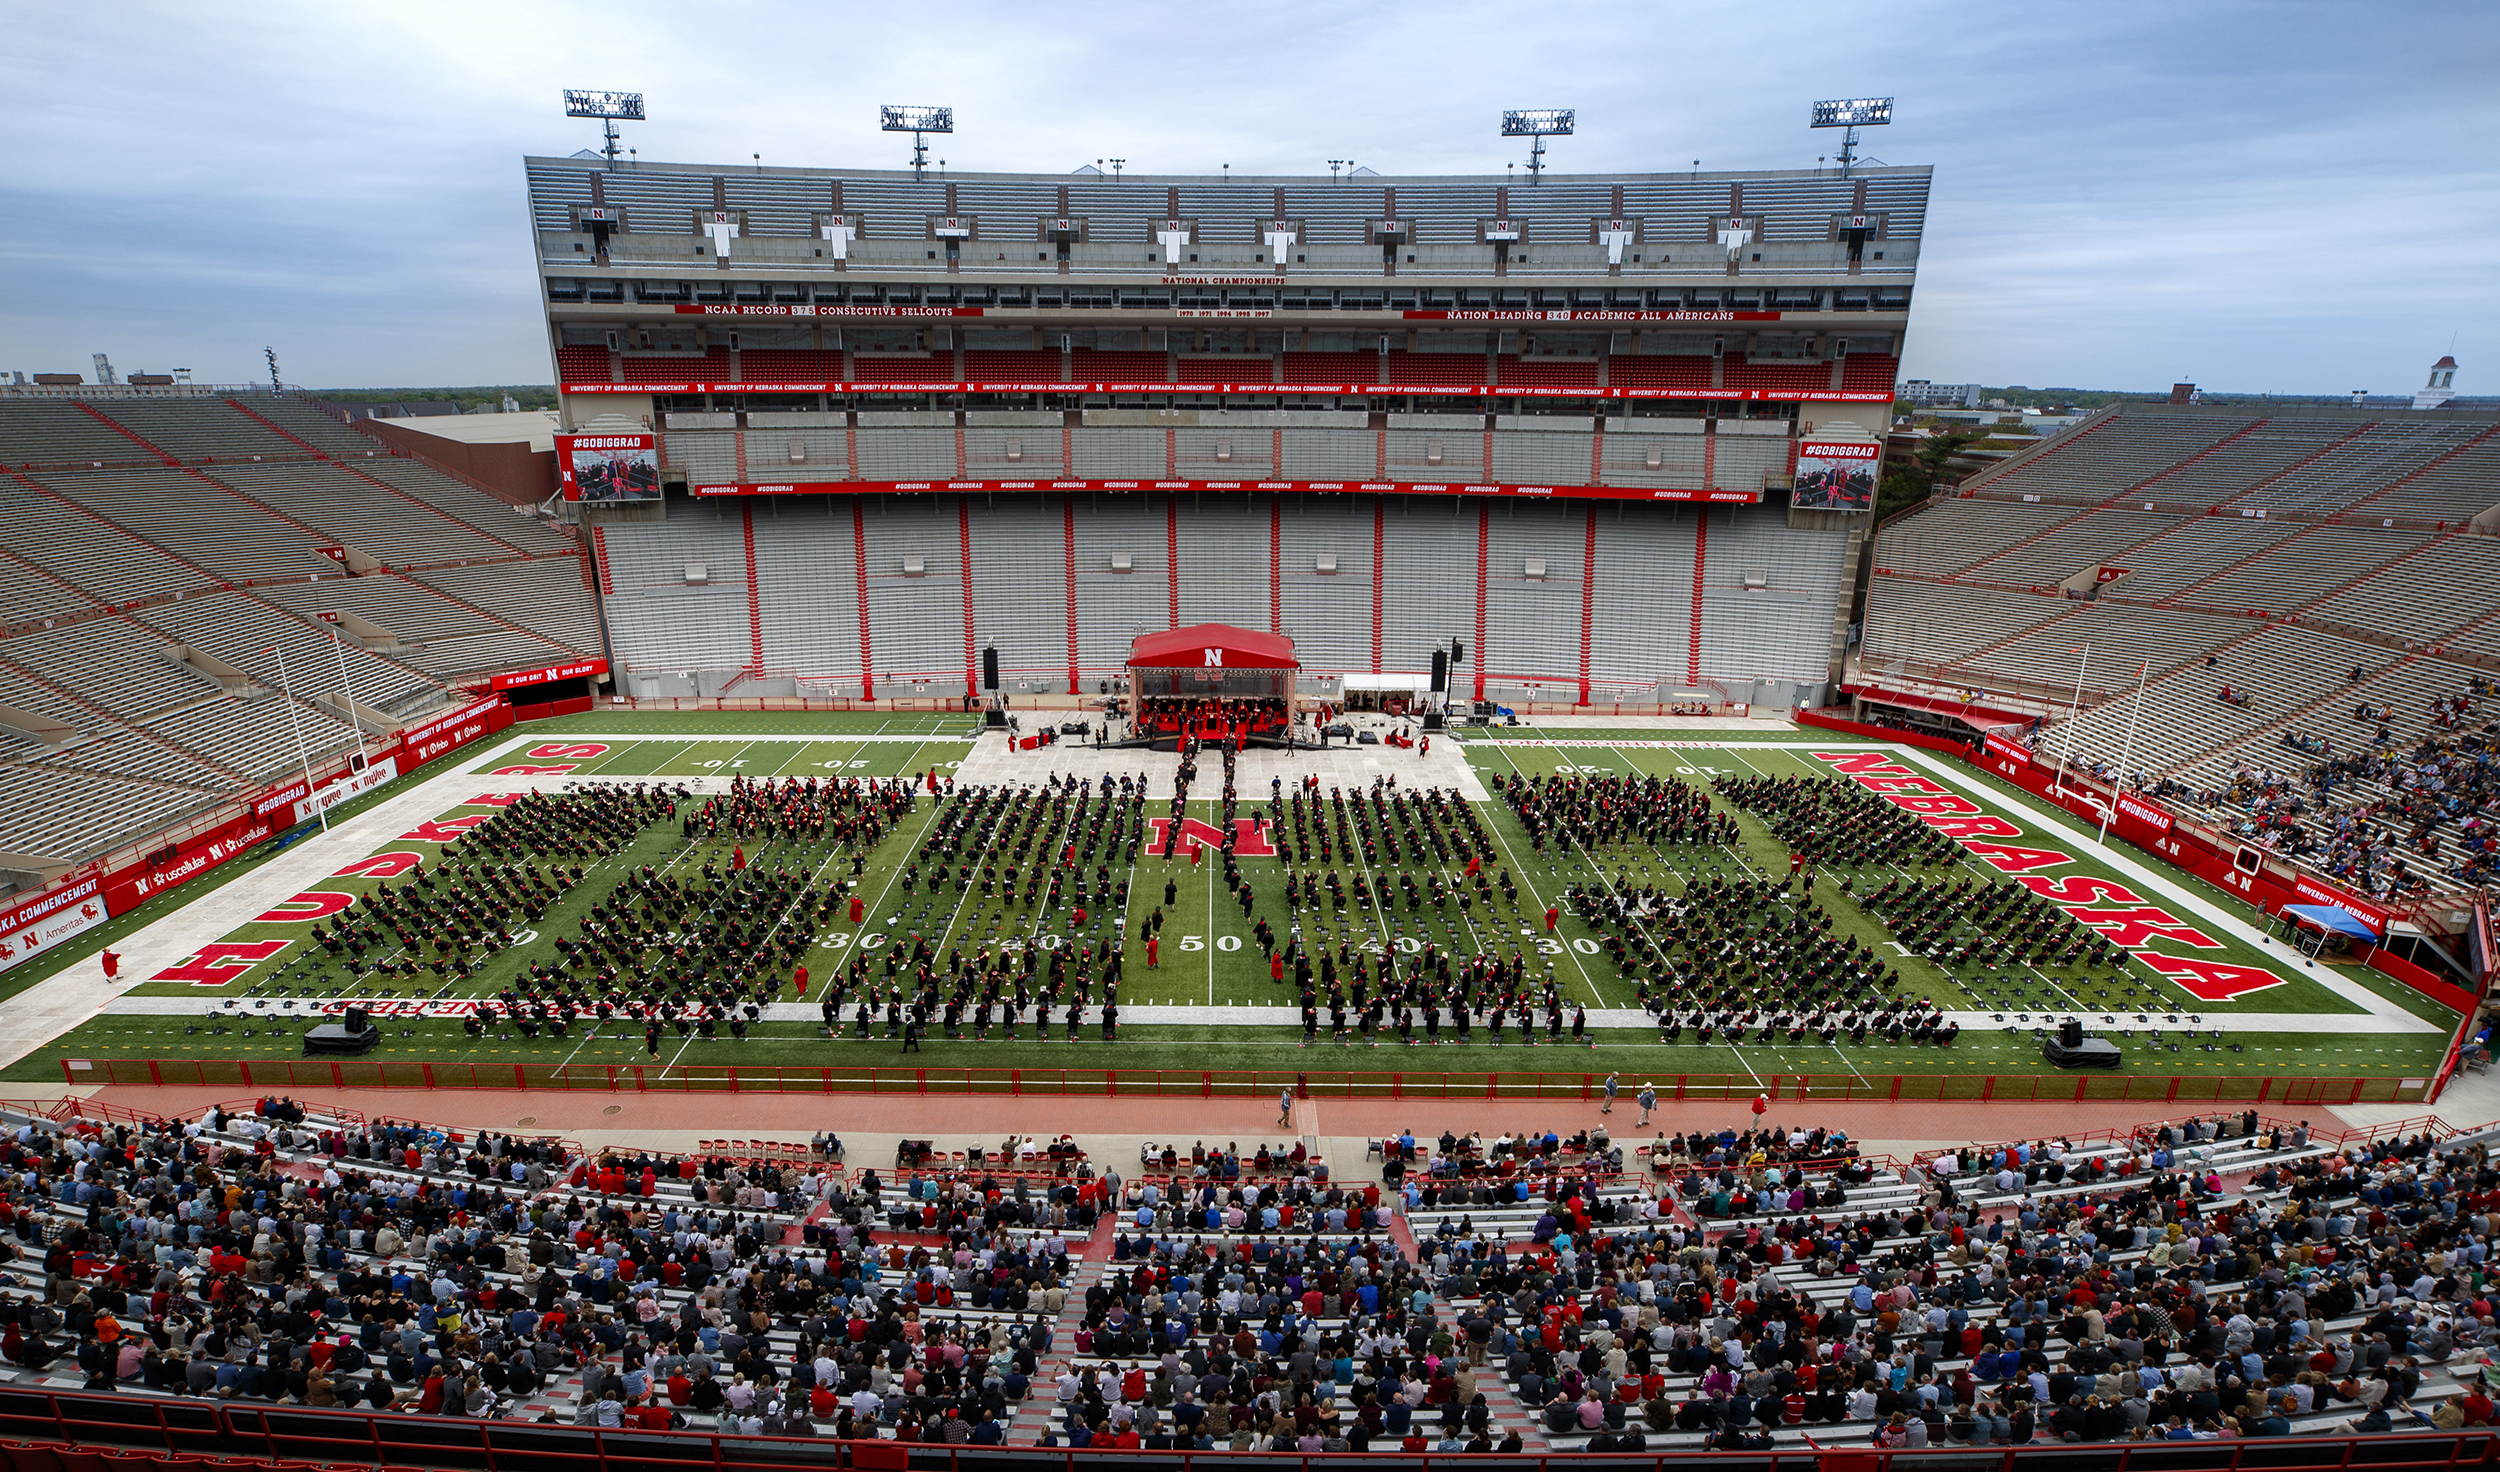 Thirteen Nebraska Engineering students will be recognized as Chancellor's Scholars during the May 20 commencement at Memorial Stadium.